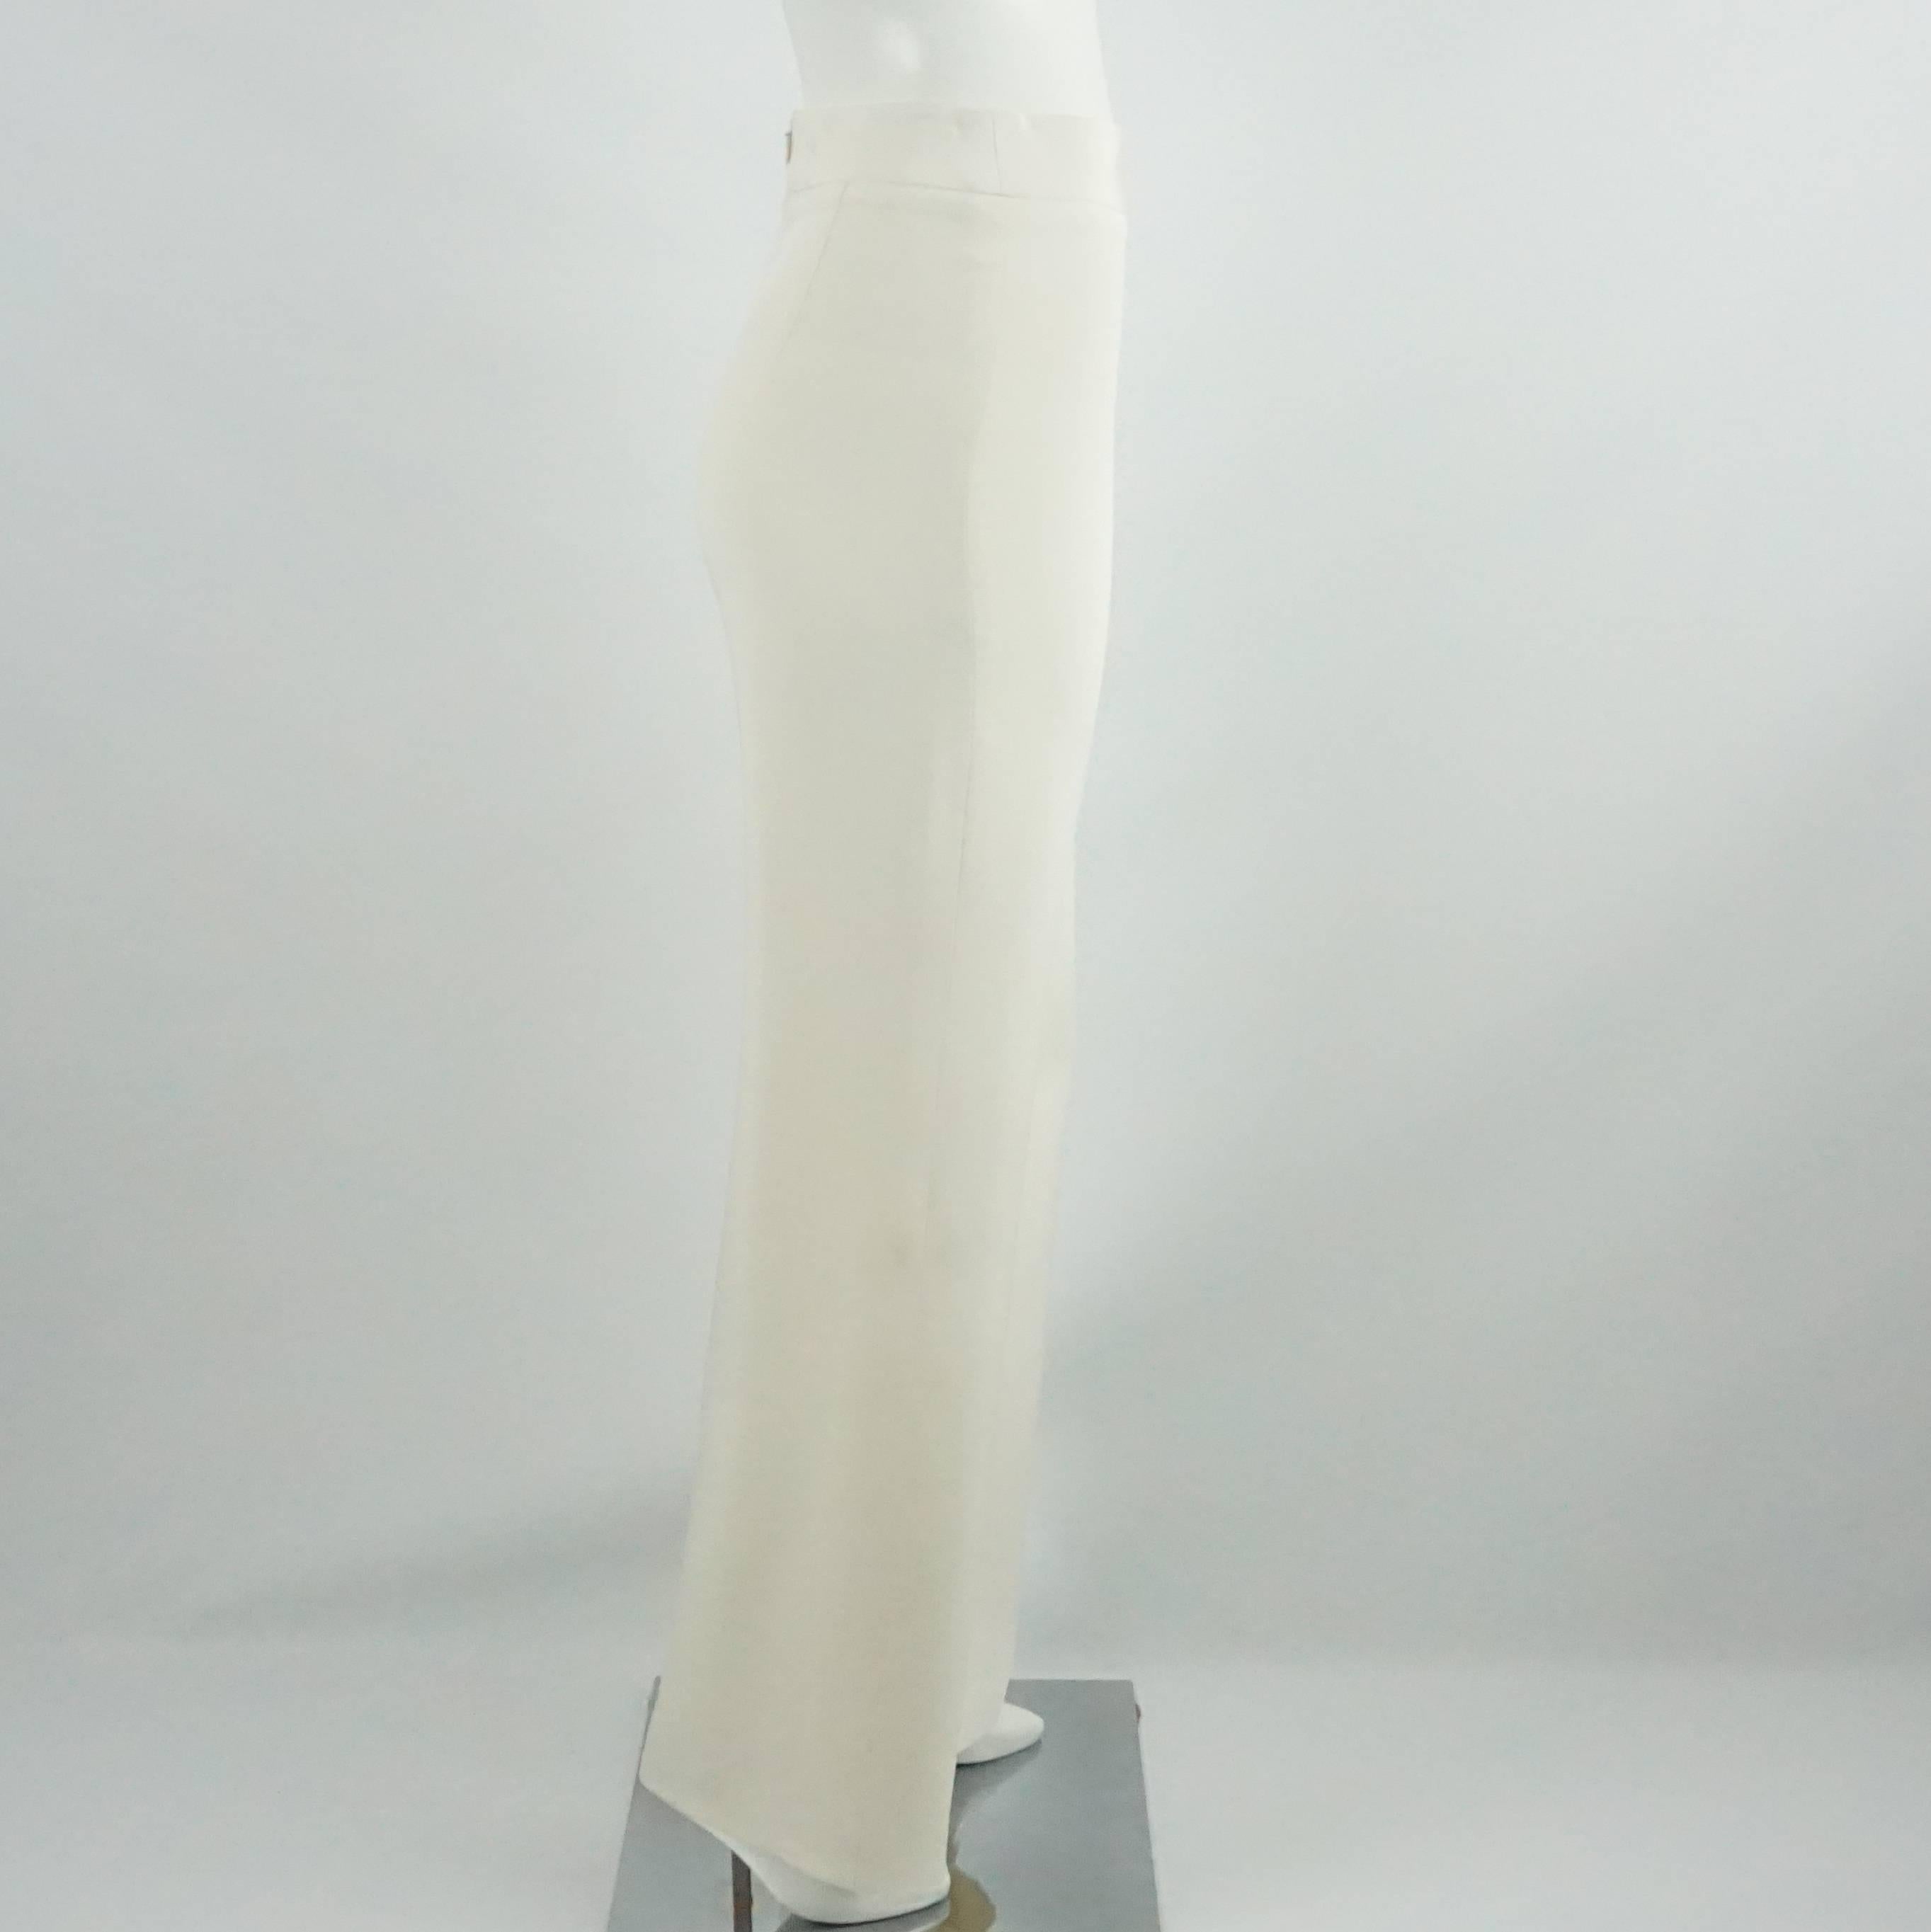 These beautiful Naeem Khan silk pants are ivory. They have a palazzo style. They are in very good condition with some minor pilled threads at the bottom.

Measurements
Waist: 27.5